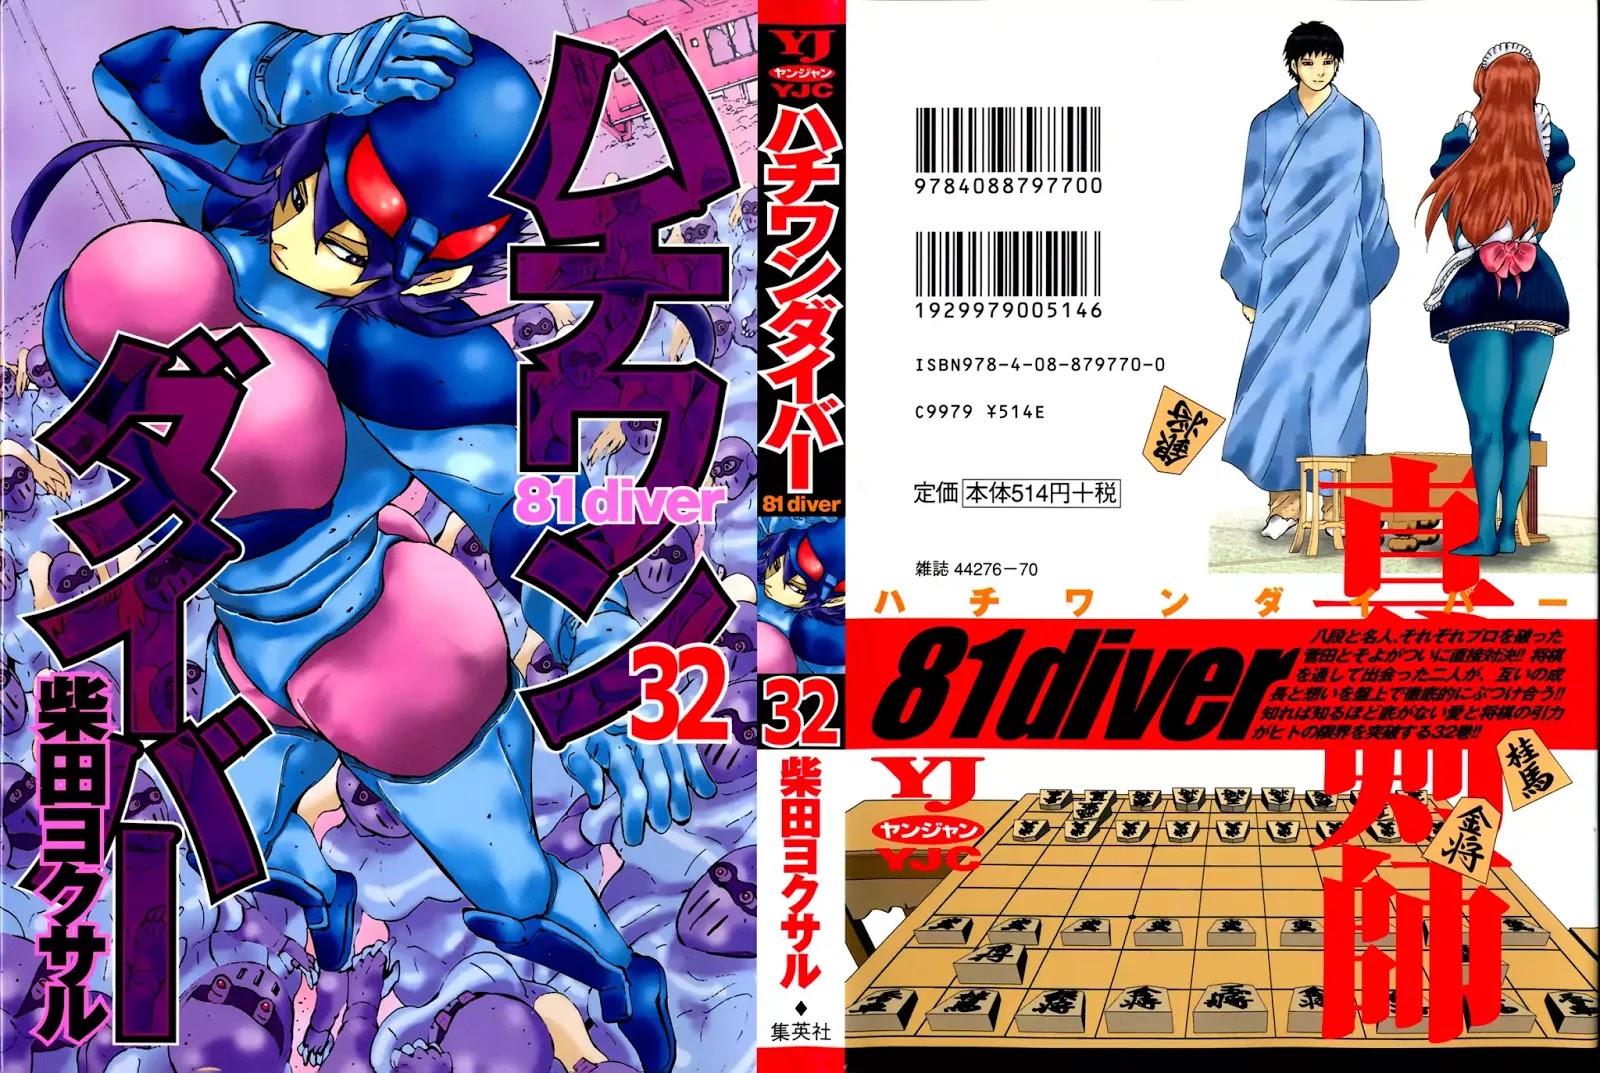 81 Diver Chapter 332 #1